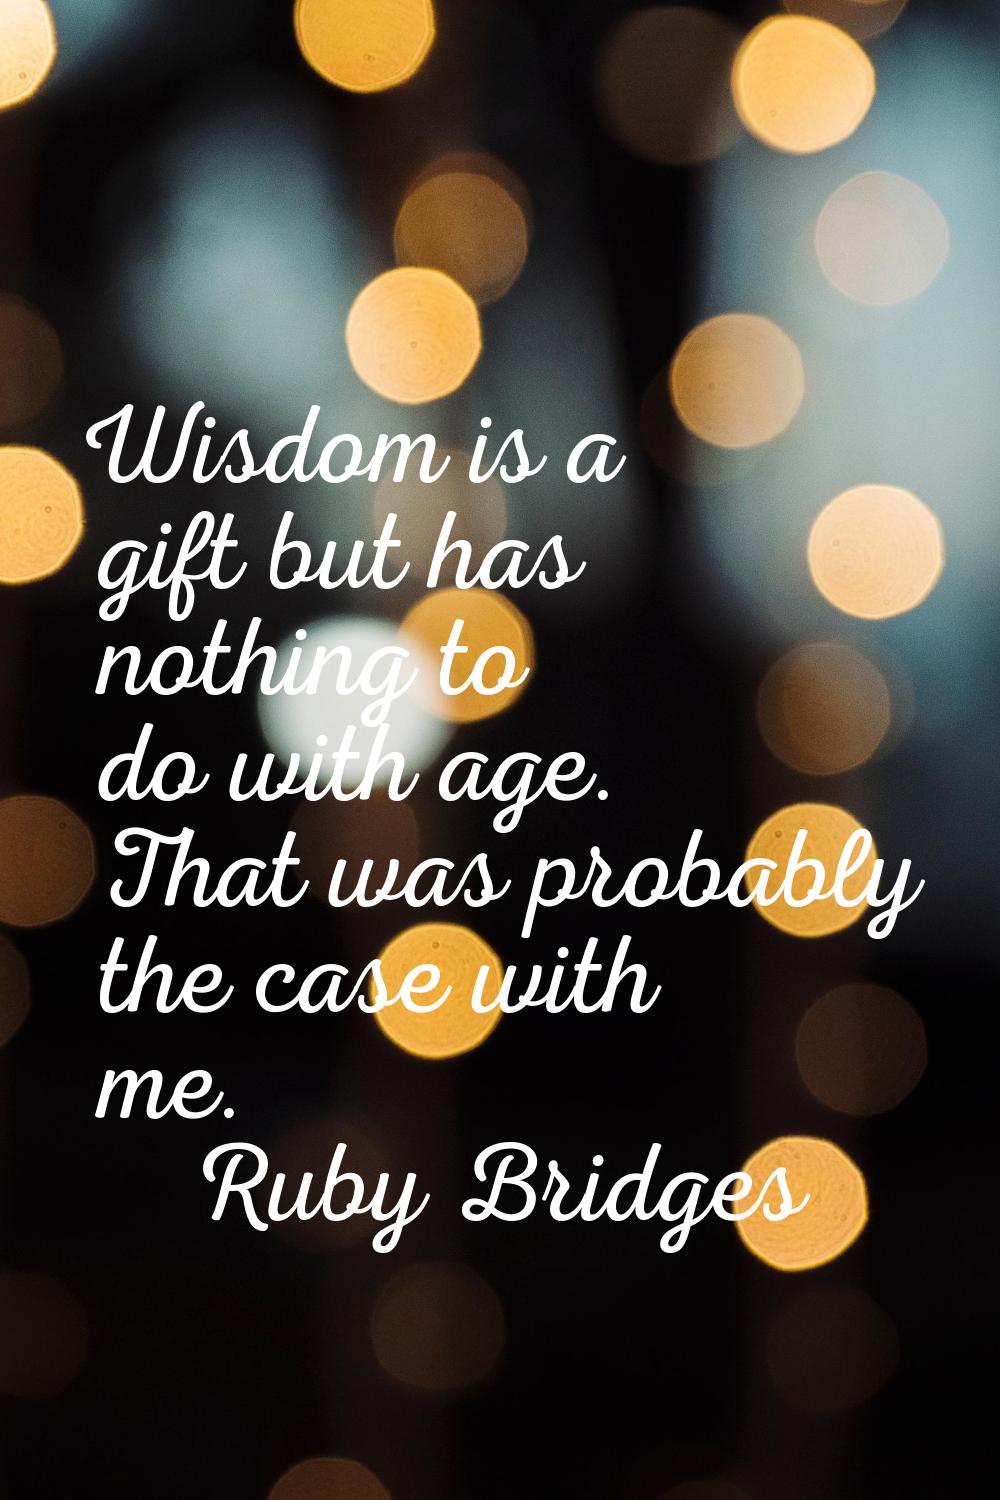 Wisdom is a gift but has nothing to do with age. That was probably the case with me.